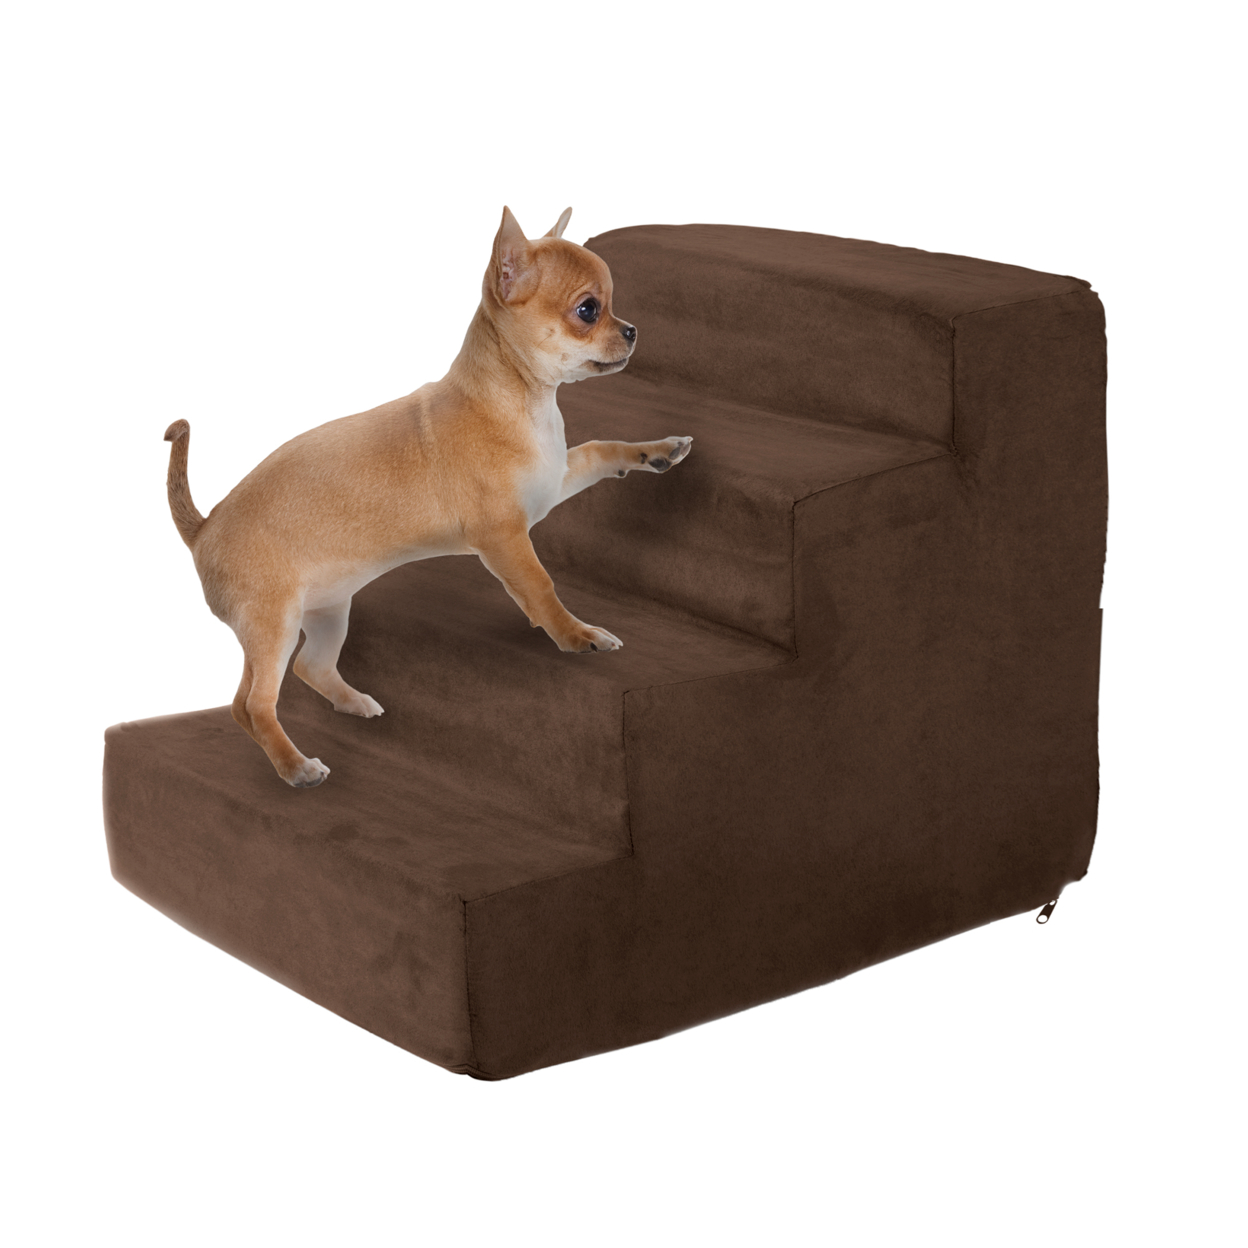 4 Steps High Density Foam Pet Stairs Removable Washable Zipper Cover 15 Inches High Small Dogs Cats Brown